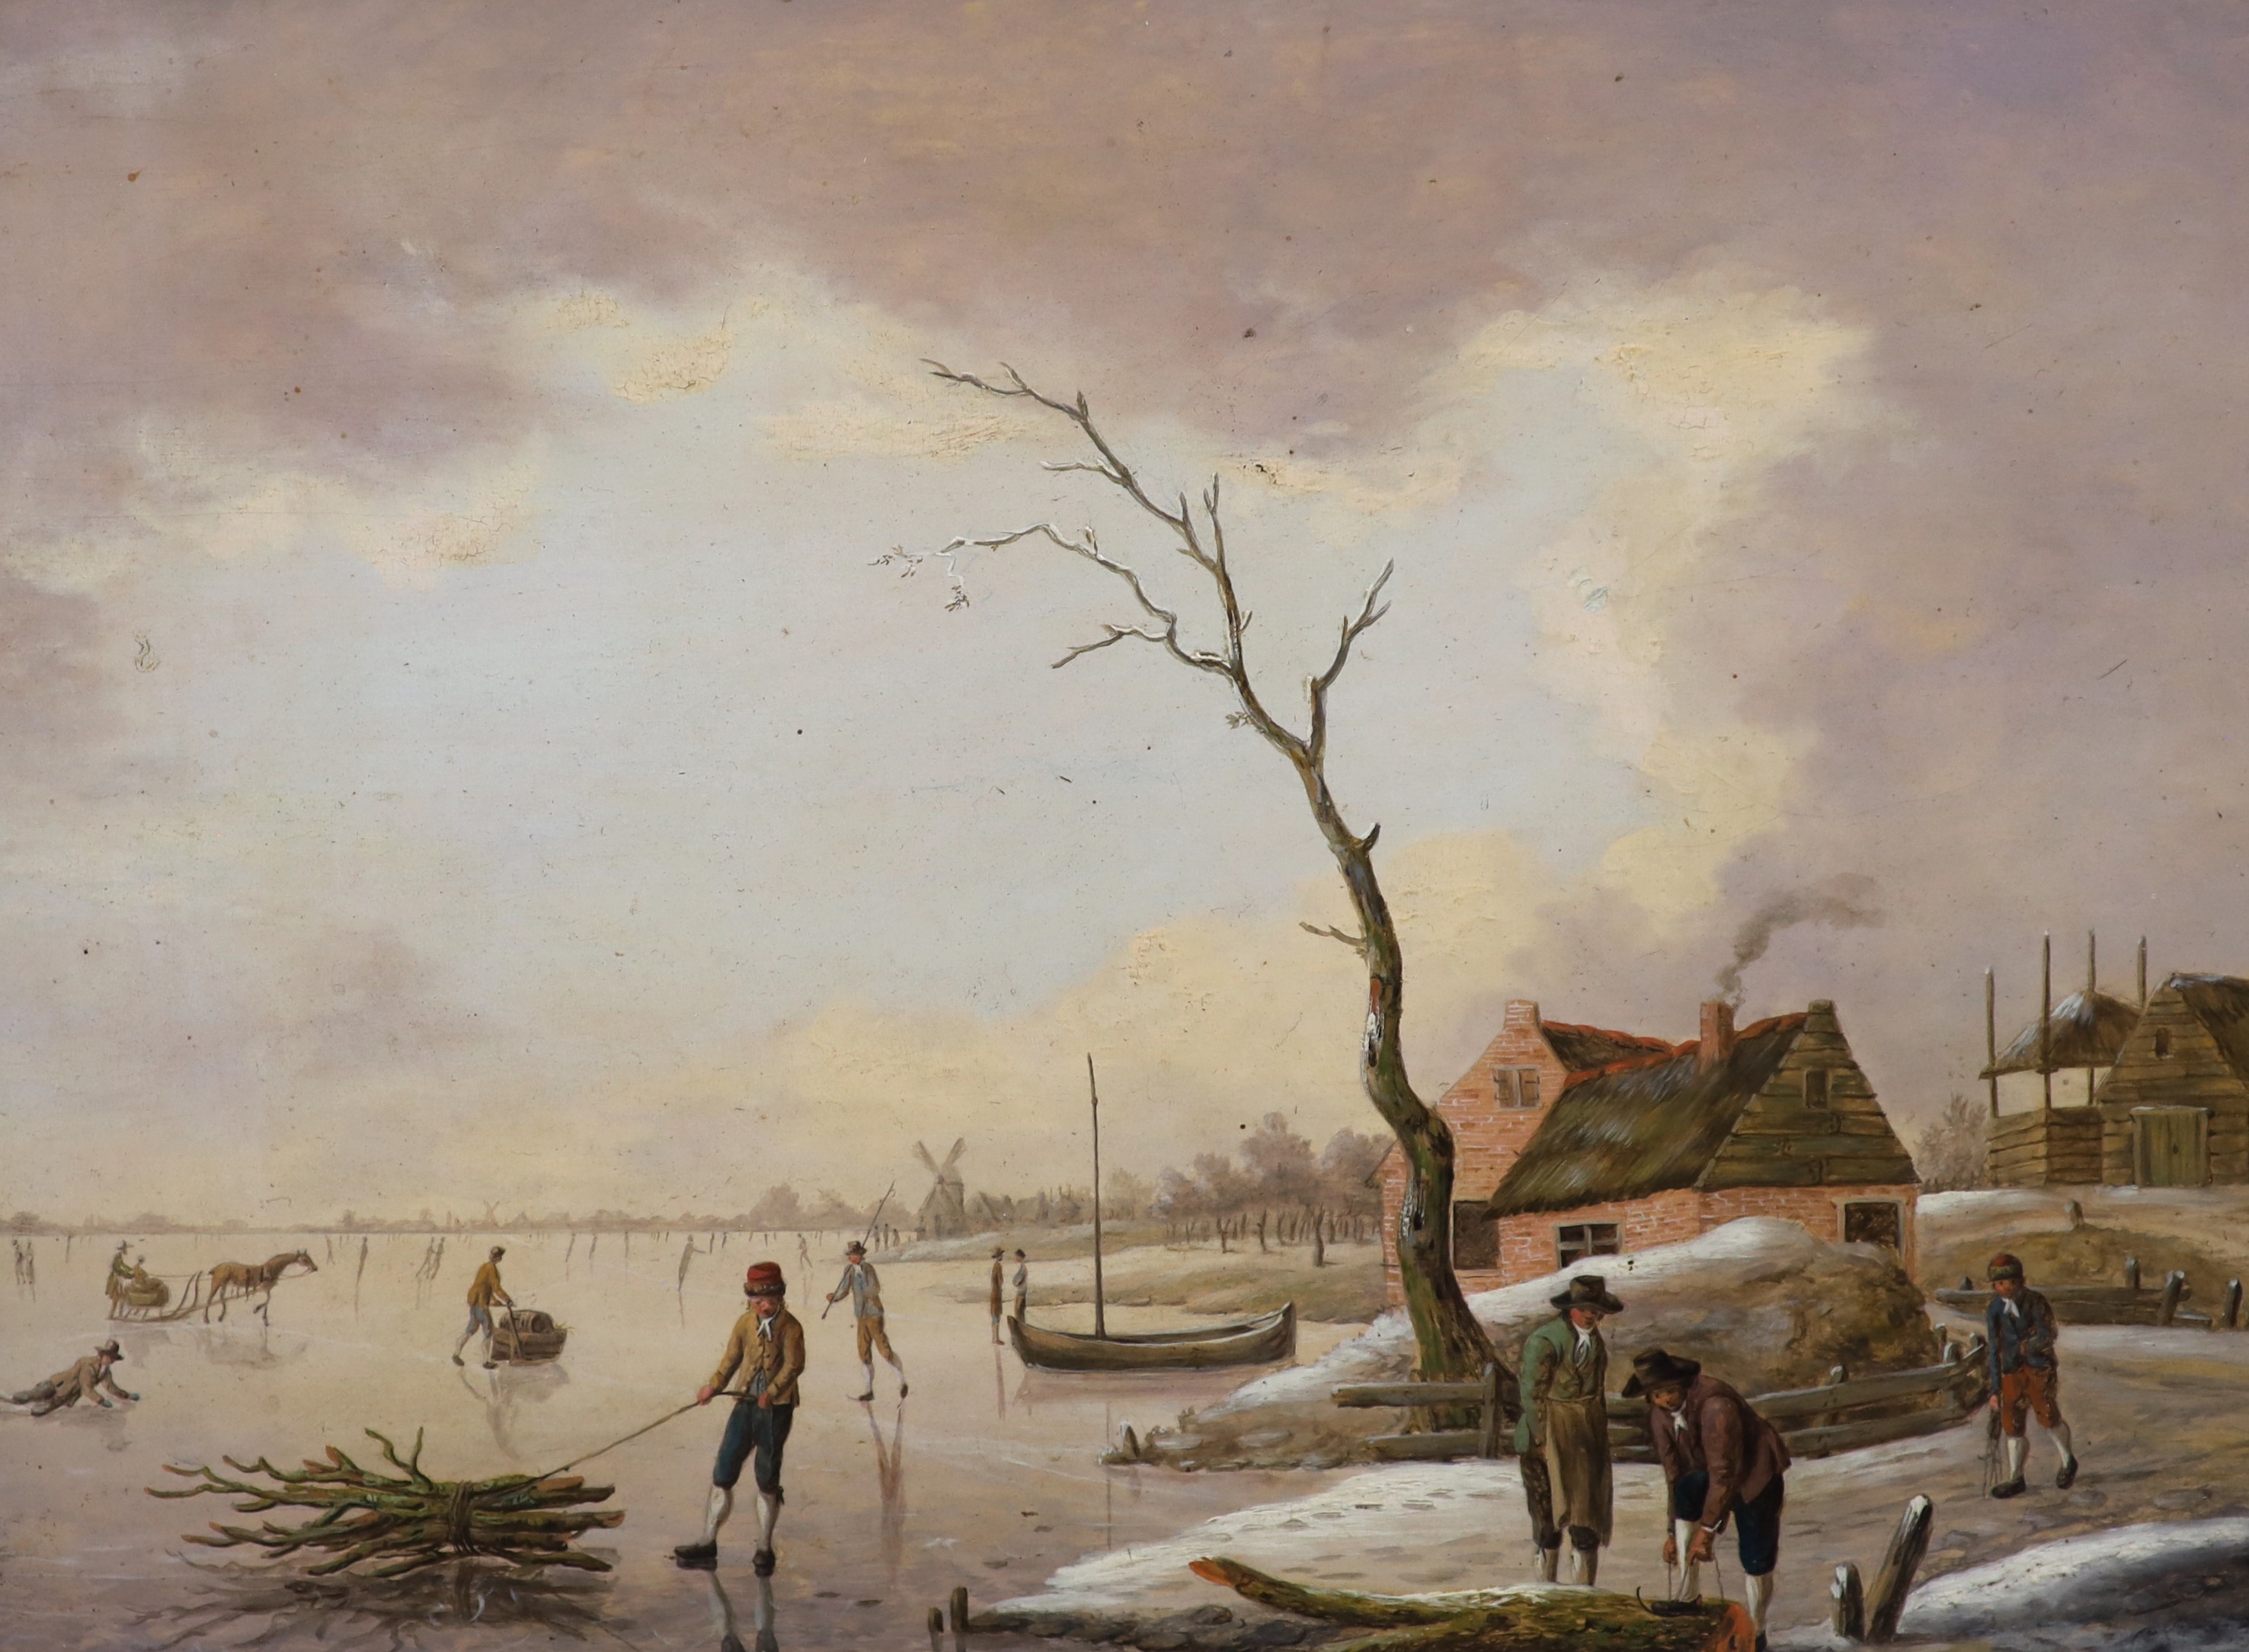 Attributed to Hendrik Willem Schweickhardt (German, 1746-1797), Winter landscape with skaters on the ice, oil on wooden panel, 23 x 31cm